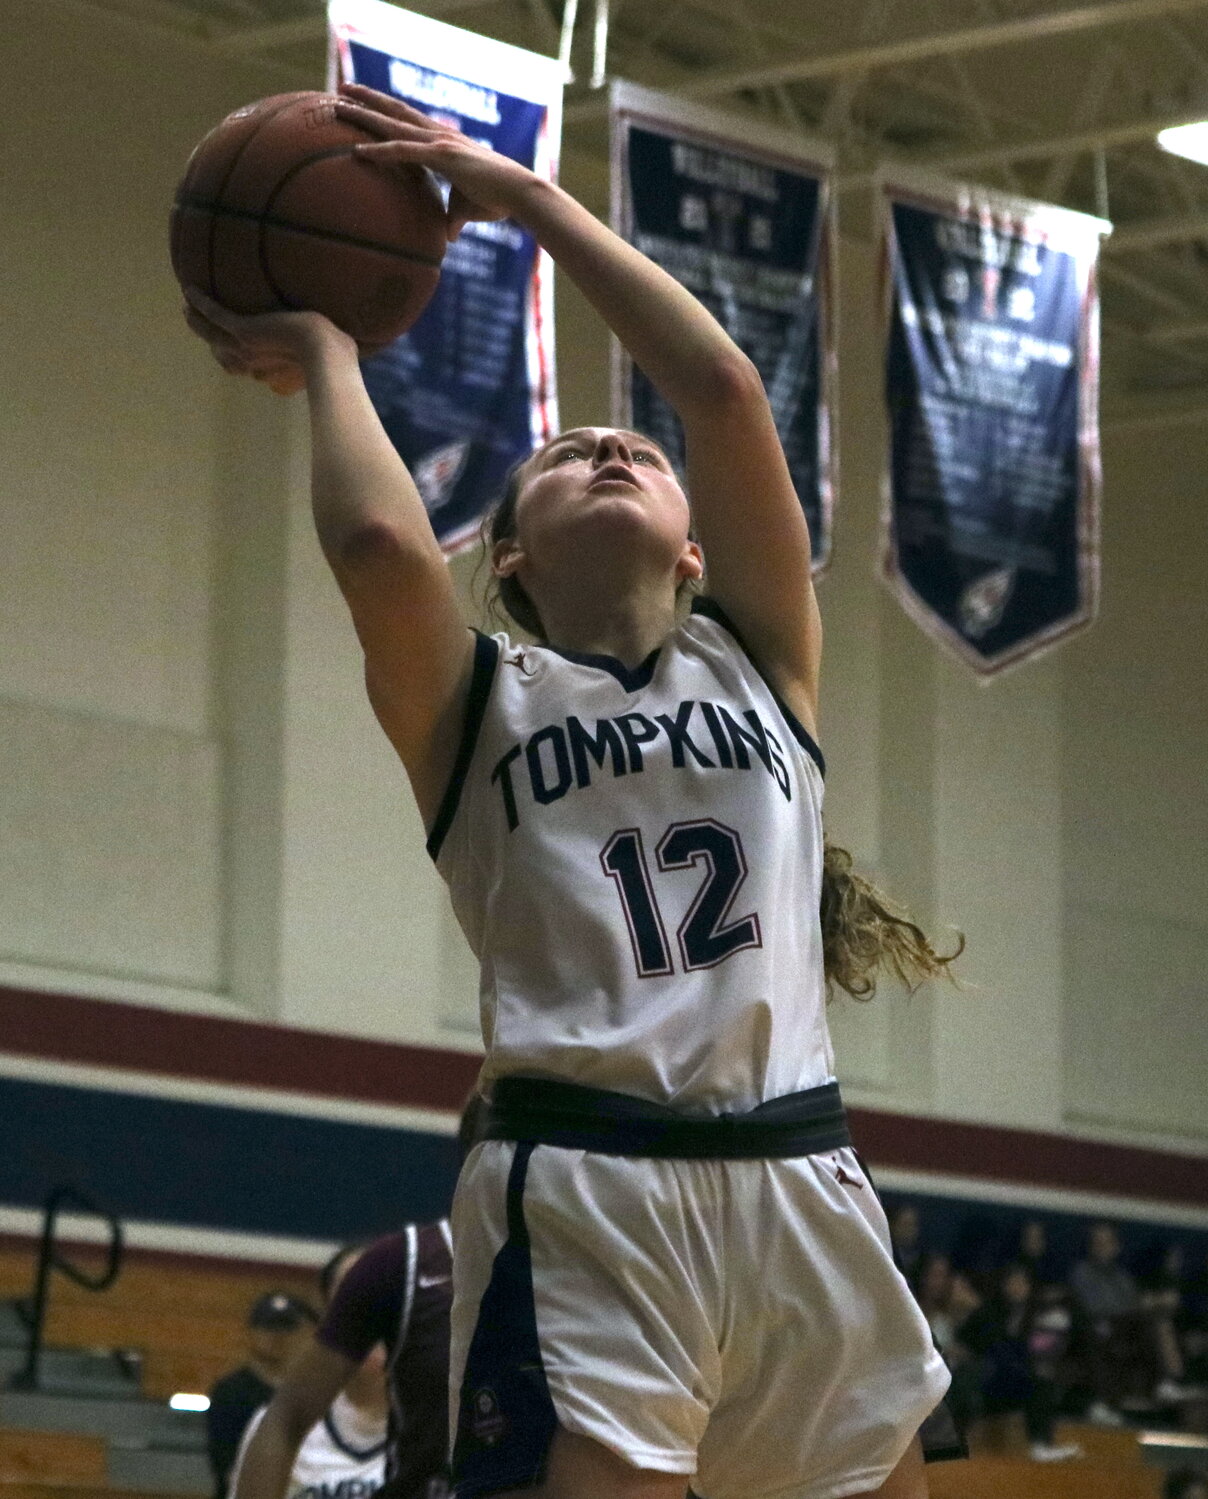 Haylie Panter shoots a layup during Tuesday's game between Tompkins and Cinco Ranch at the Tompkins gym.